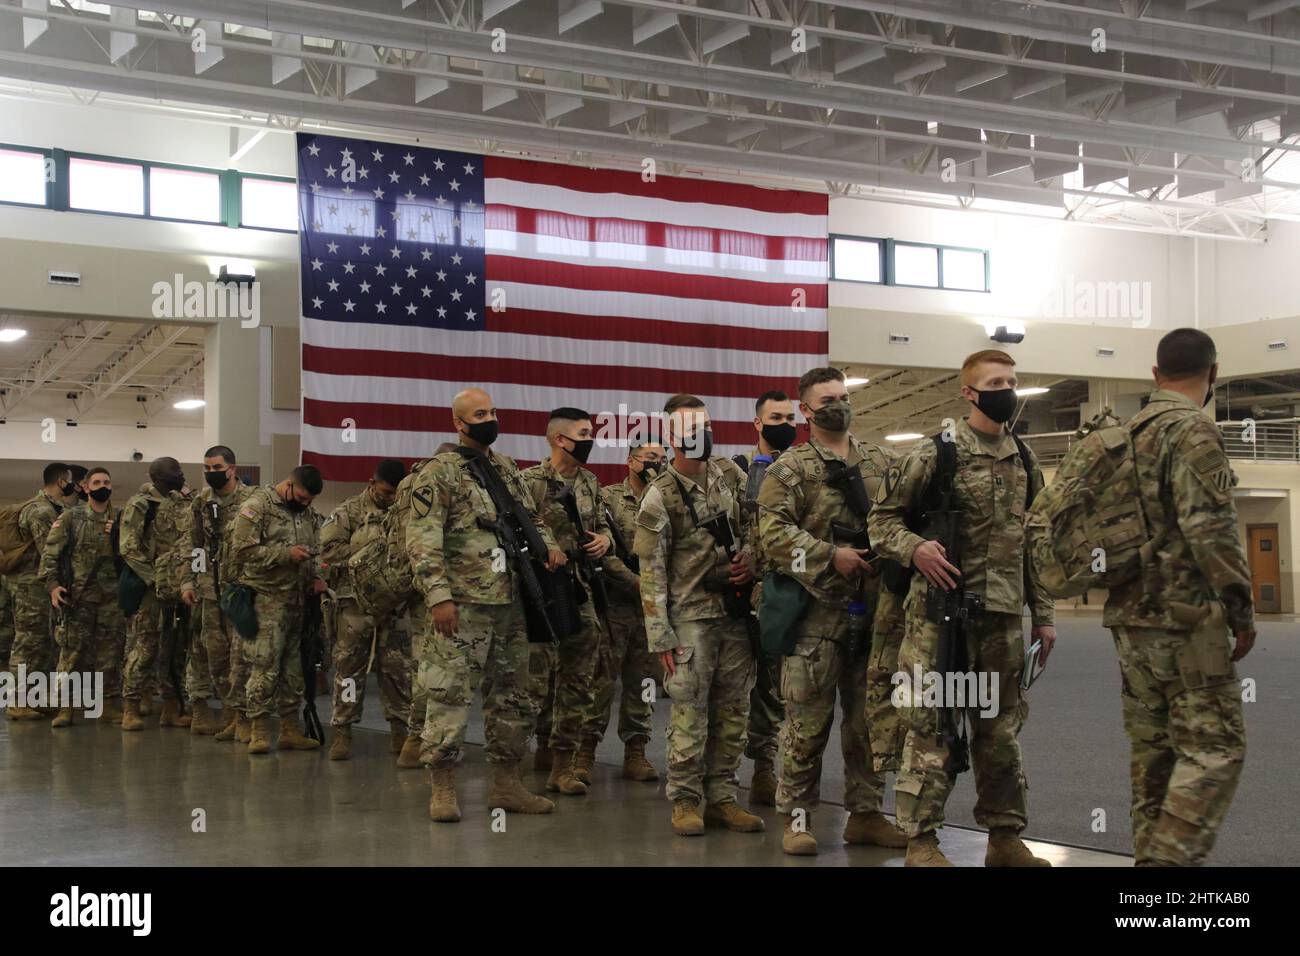 Savannah, United States. 27th Feb, 2022. U.S. Army soldiers, assigned to the 1st Armored Brigade Combat Team, 3rd Infantry Division, line up to board a civilian aircraft for deployment to NATO countries from Hunter Army Airfield, February 27, 2022 in Savannah, Georgia. The soldiers are deploying to Eastern Europe in support of NATO allies and deter Russian aggression toward Ukraine. Credit: Capt. John D. Howard Jr/U.S Army/Alamy Live News Stock Photo